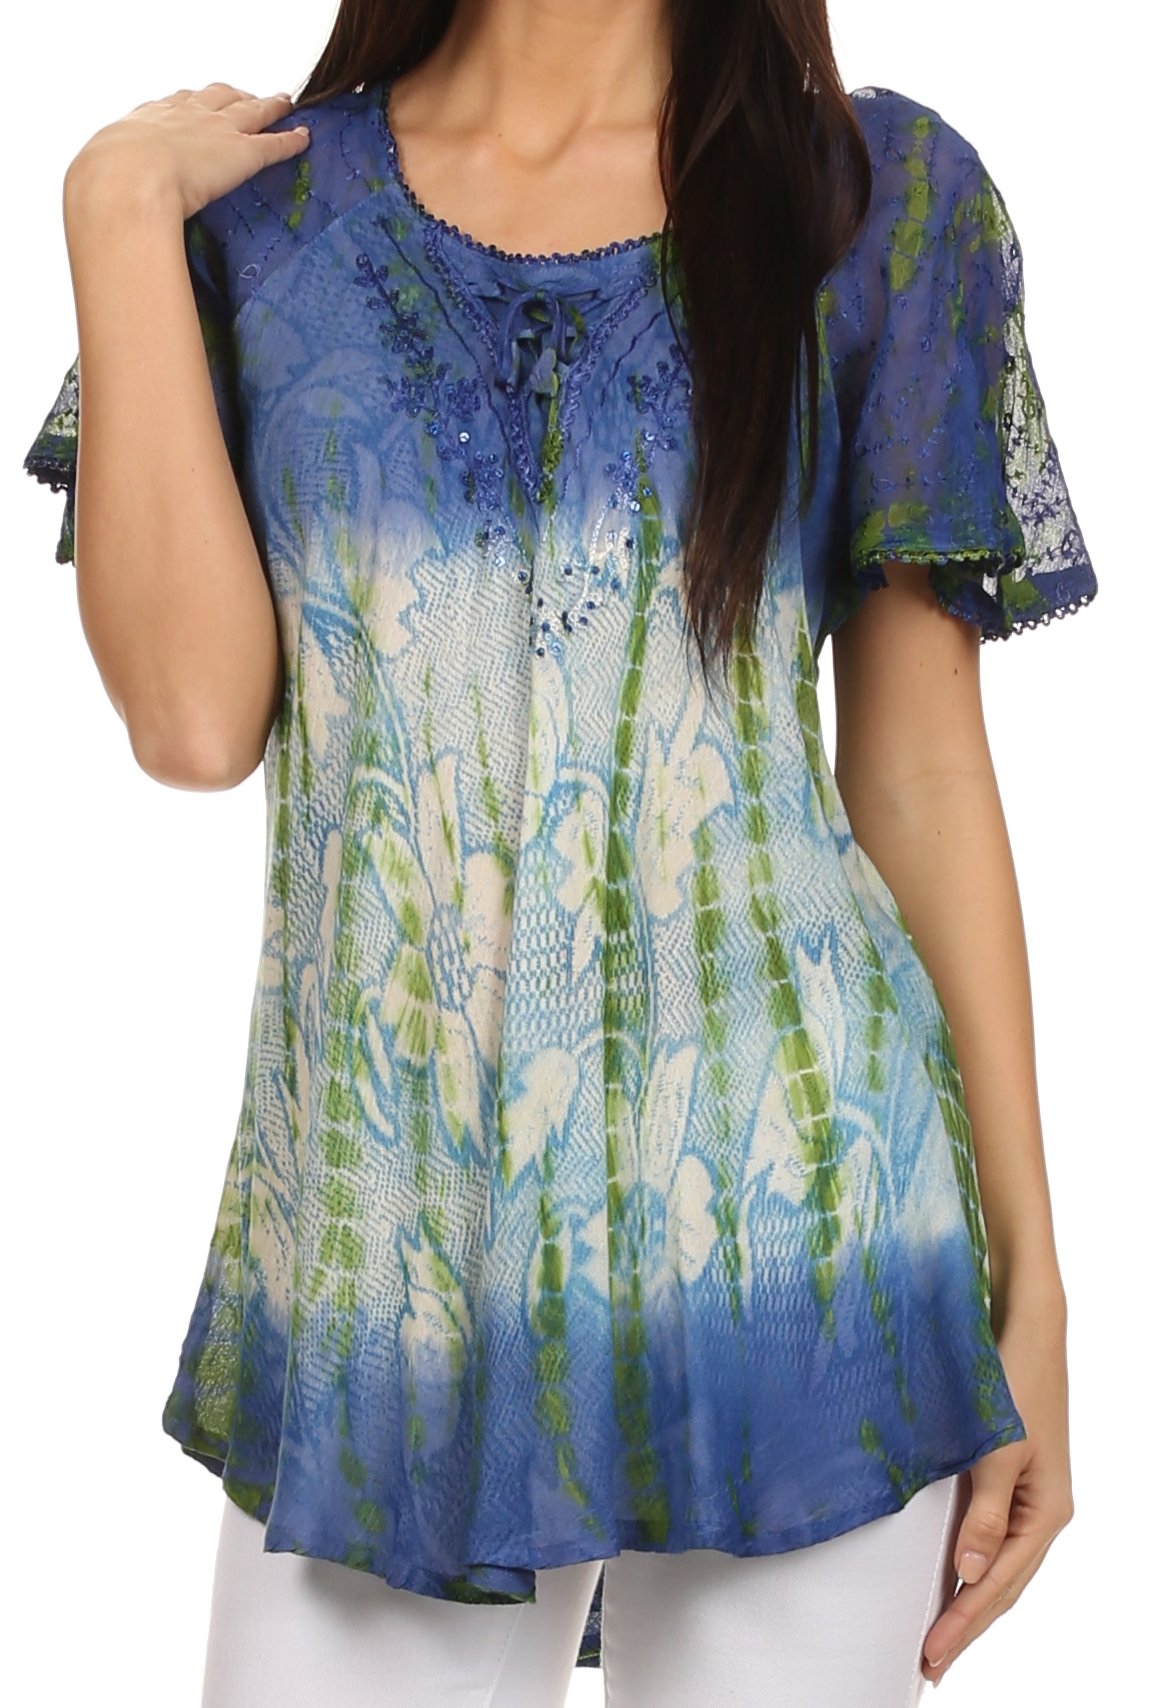 Sakkas Dina Relaxed Fit Sequin Tie Dye Embroidery Cap Sleeves Blouse